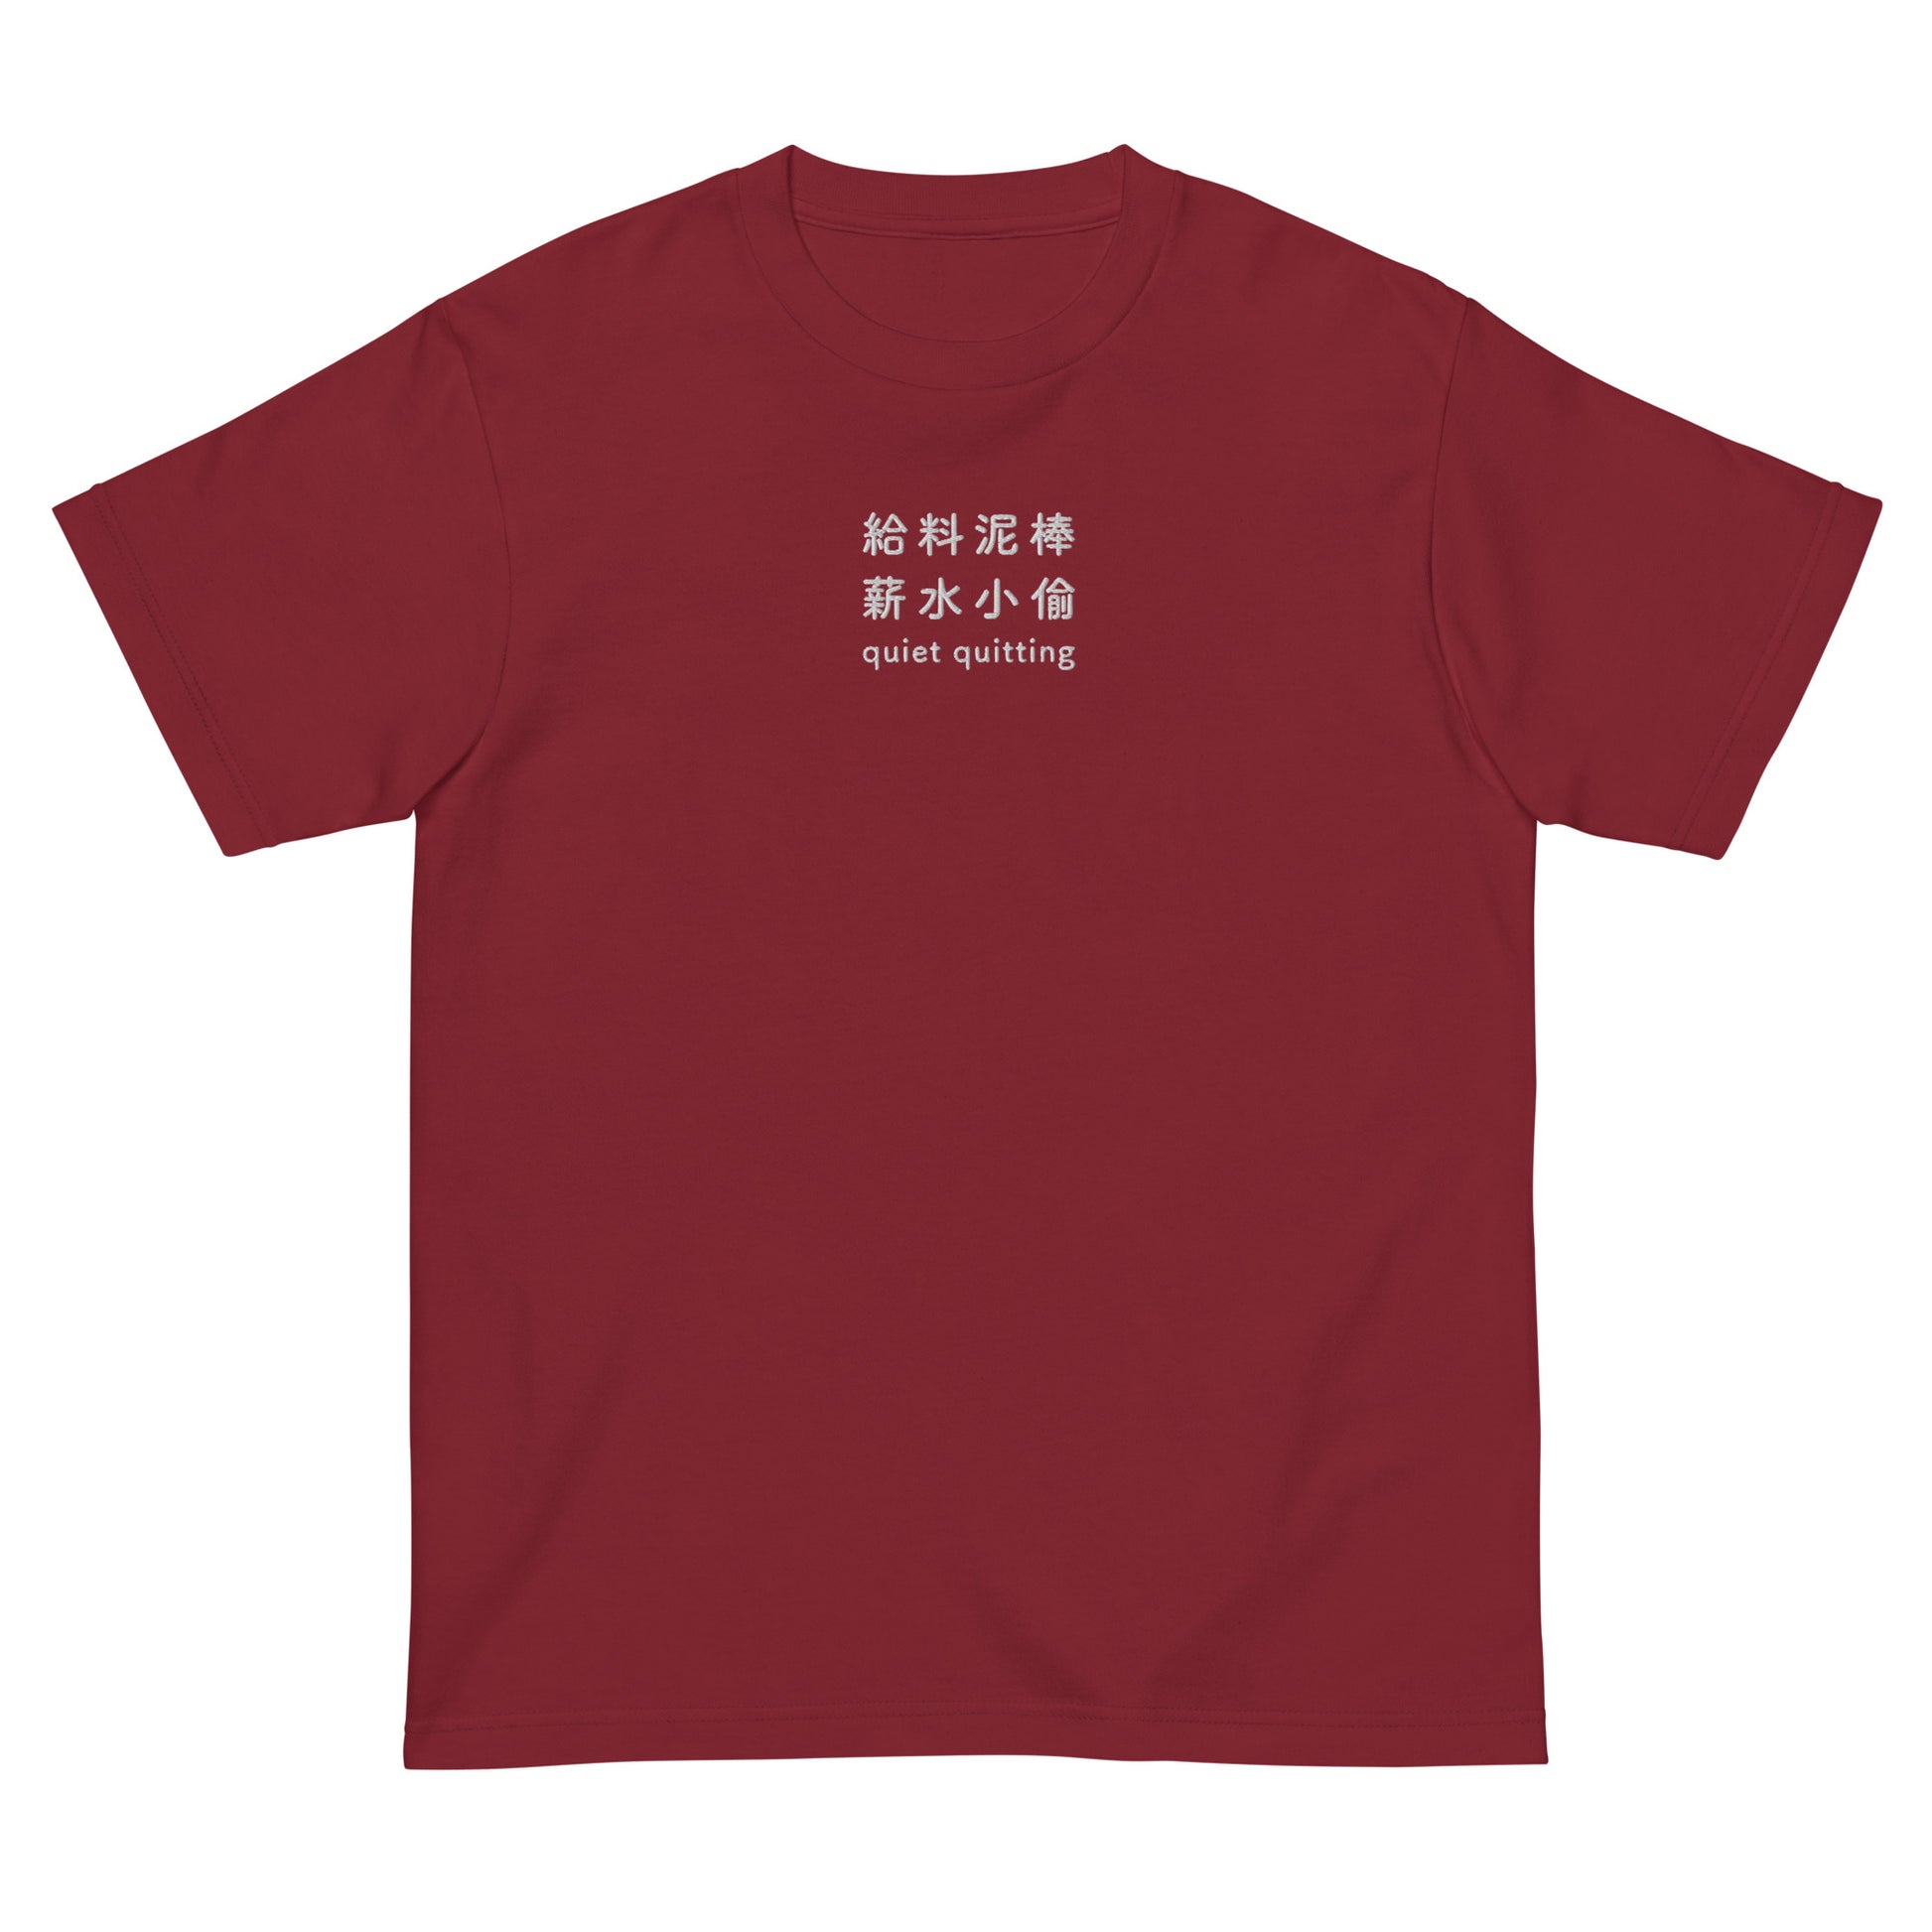 Red High Quality Tee - Front Design with an White Embroidery "Quiet Quitting" in Japanese,Chinese and English